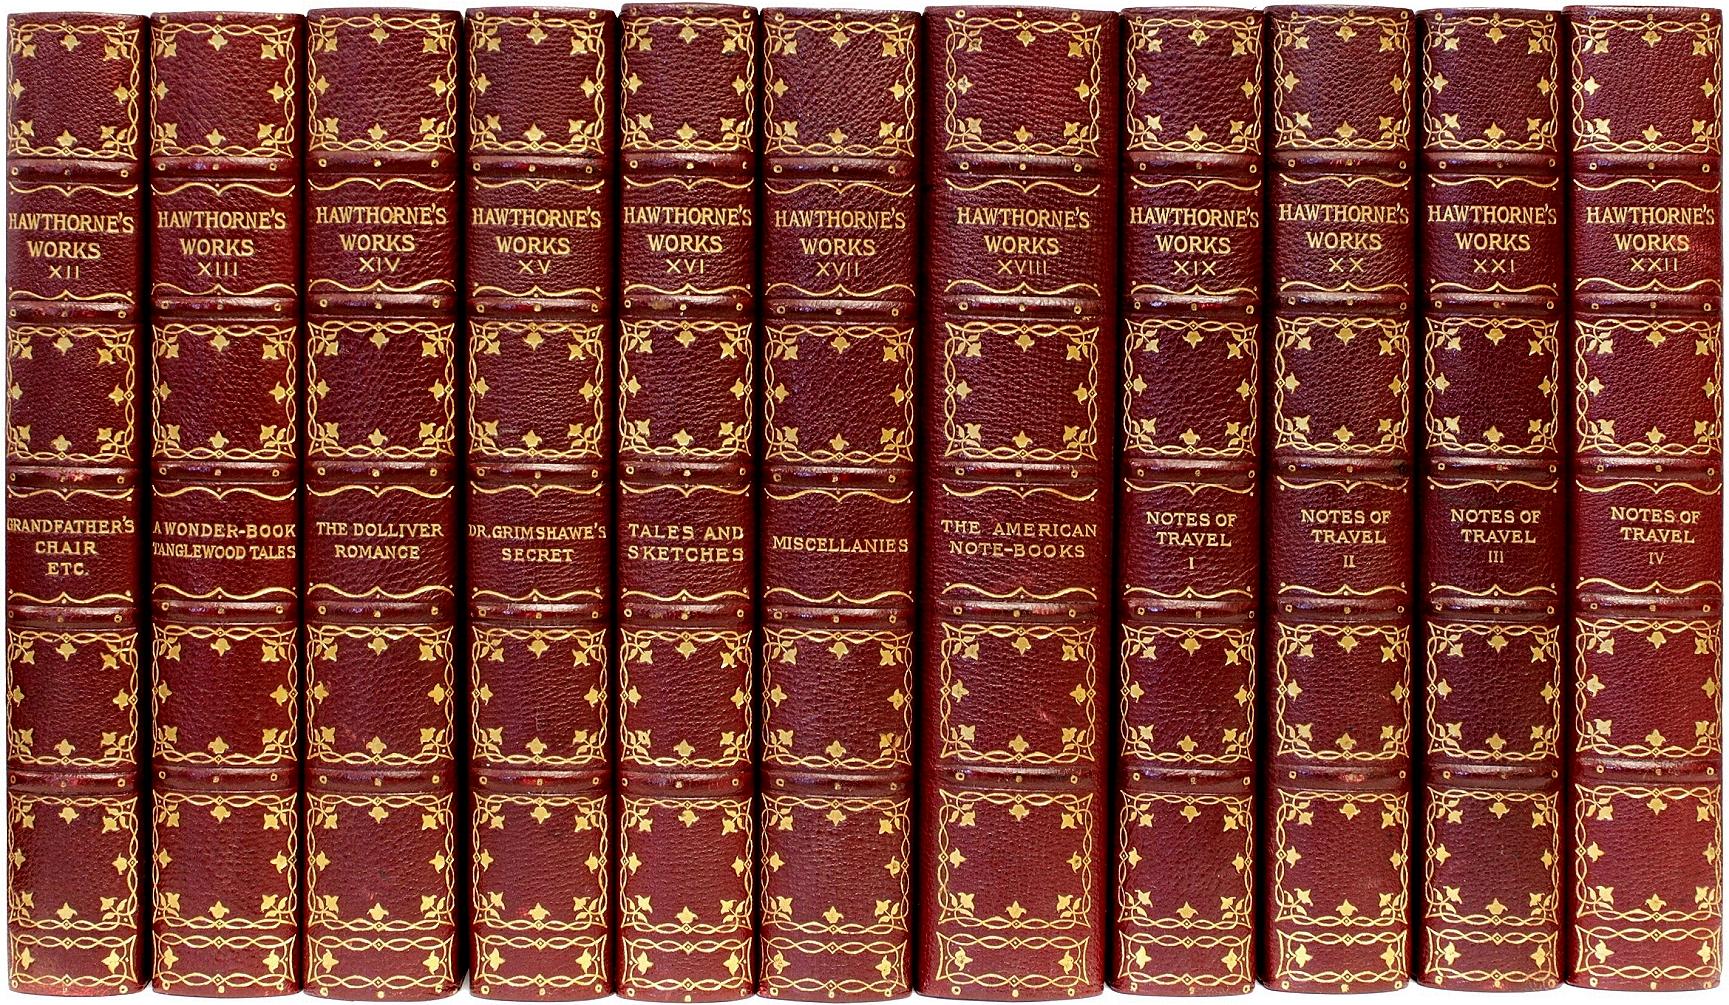 Author: Hawthorne, Nathaniel. 

Title: The Complete Works of Nathaniel Hawthorne.

Publisher: Boston: Houghton, Mifflin & Co., 1900.

Description: The Old Manse Edition. 22 vols., 7-3/4